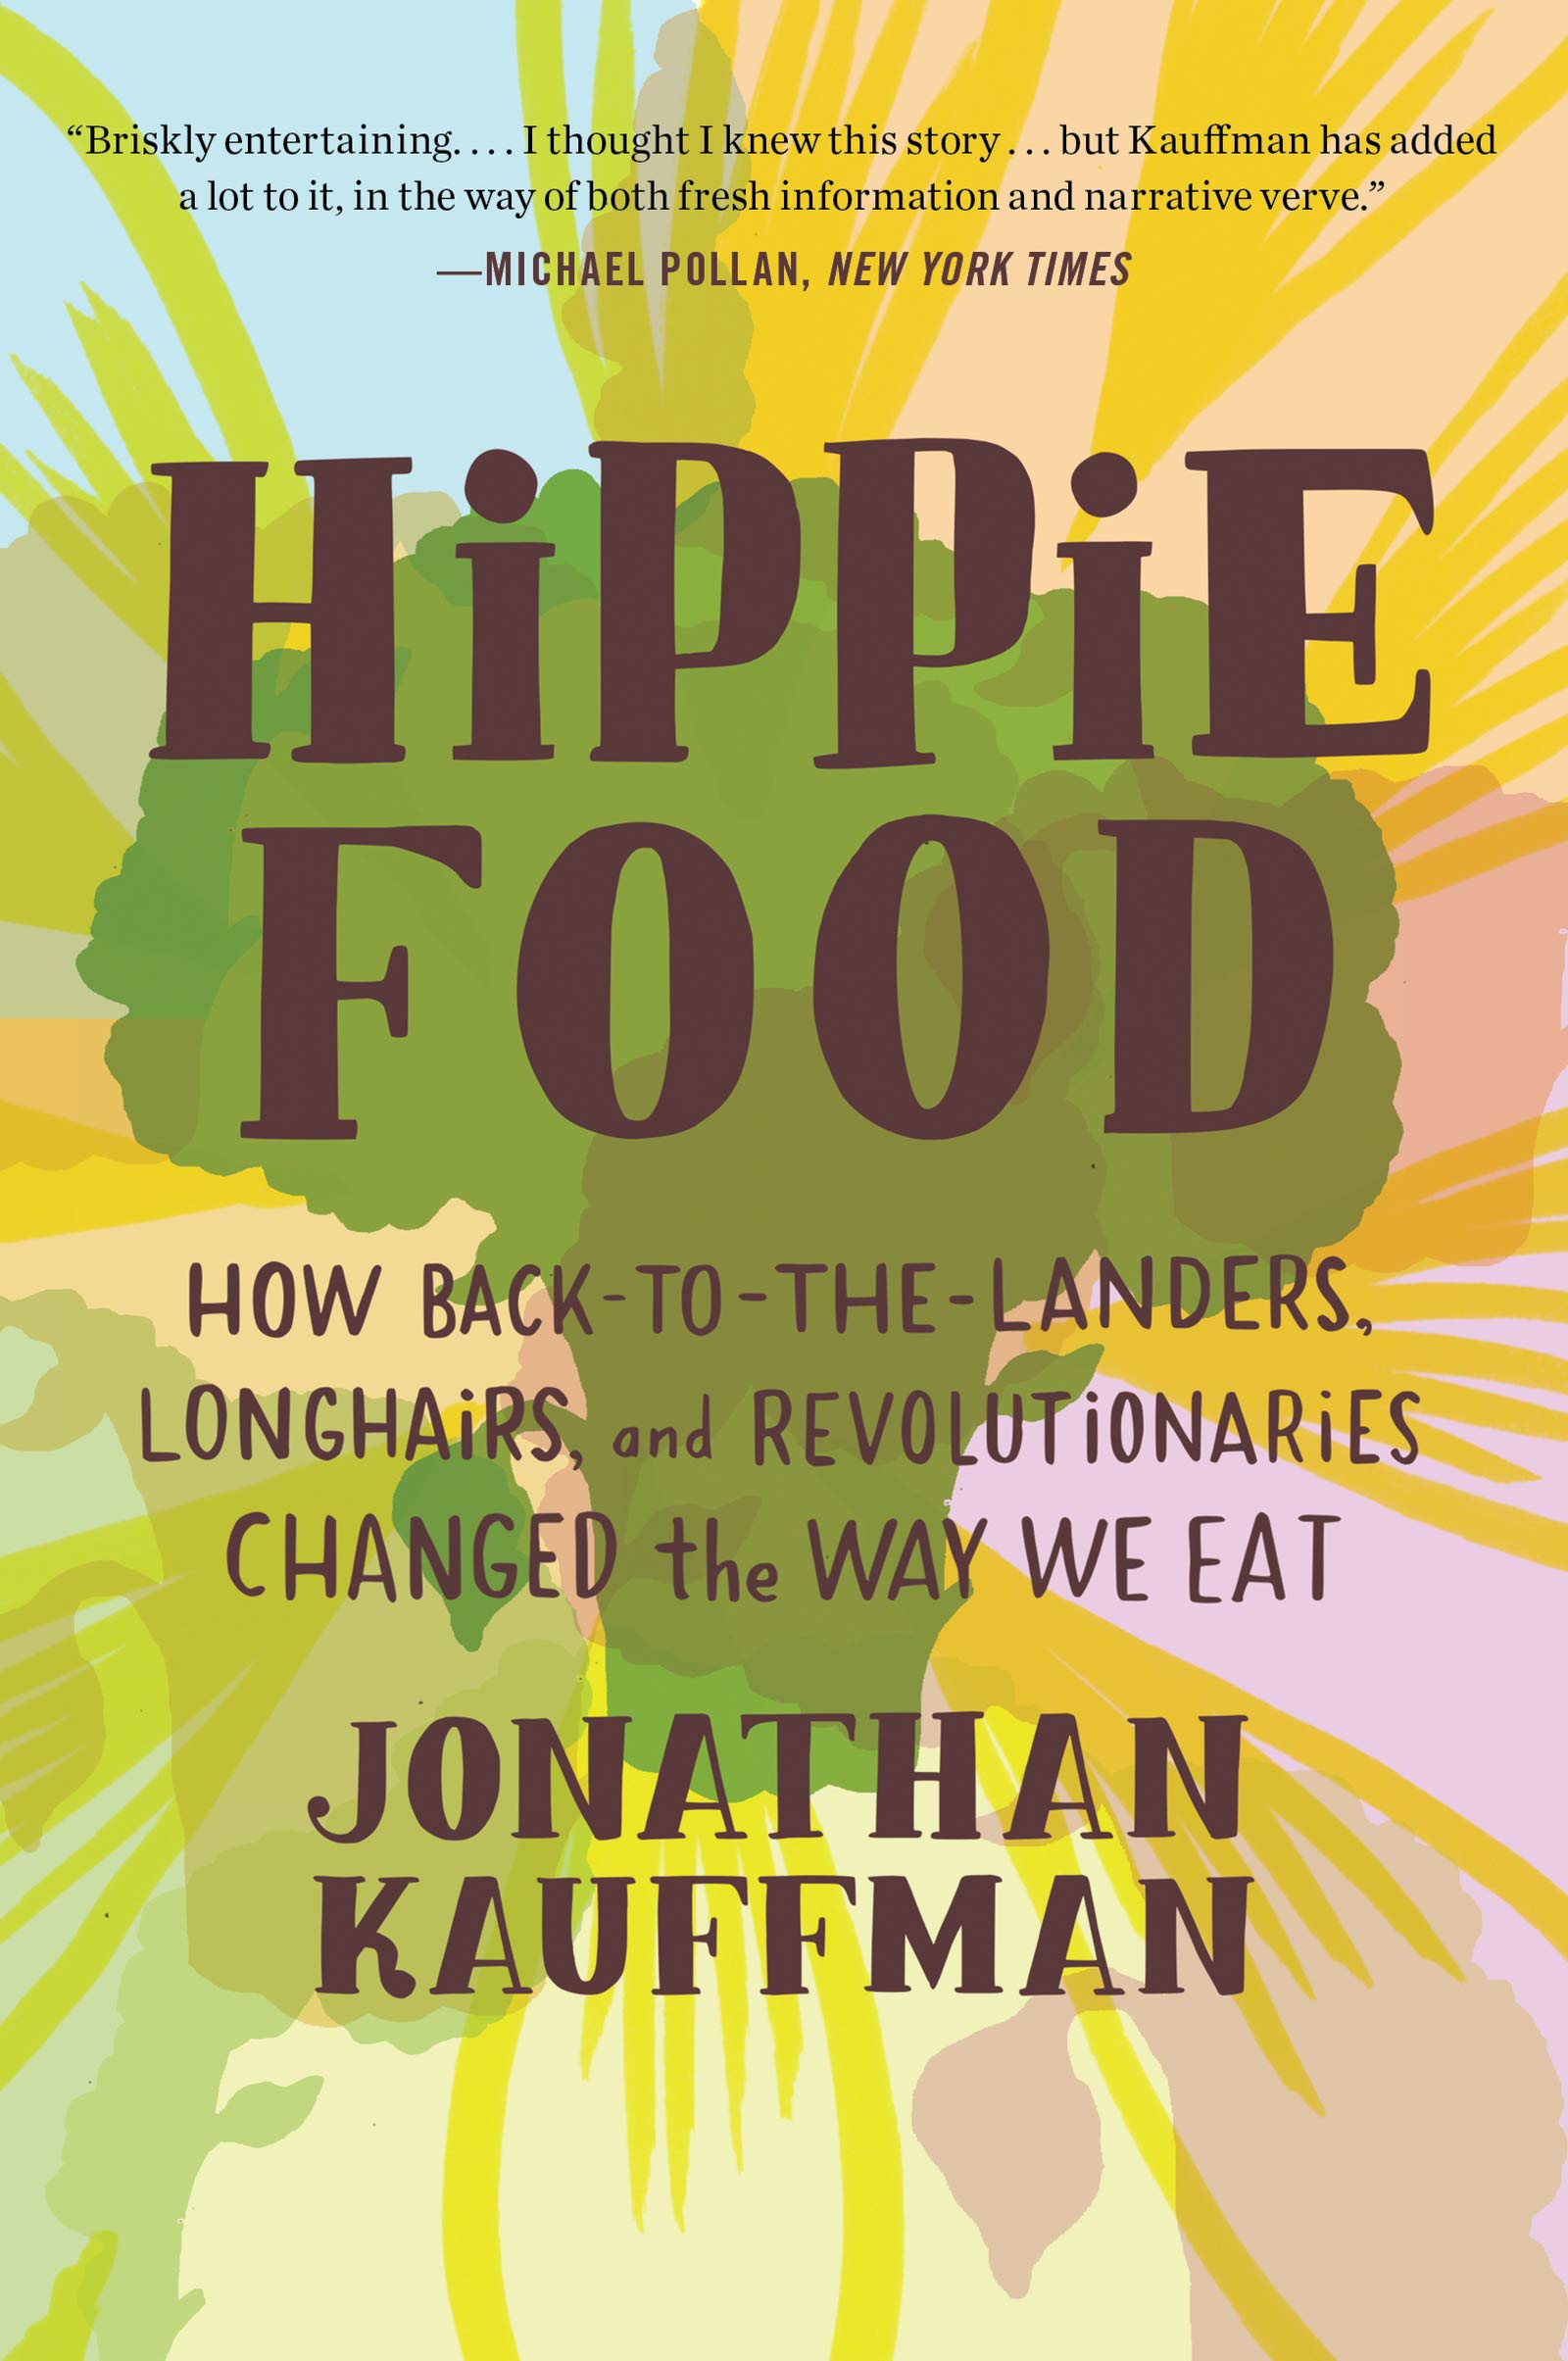 Hippie Food: How Back-to-the-Landers, Longhairs, and Revolutionaries Changed the Way We Eat (Jonathan Kauffman)